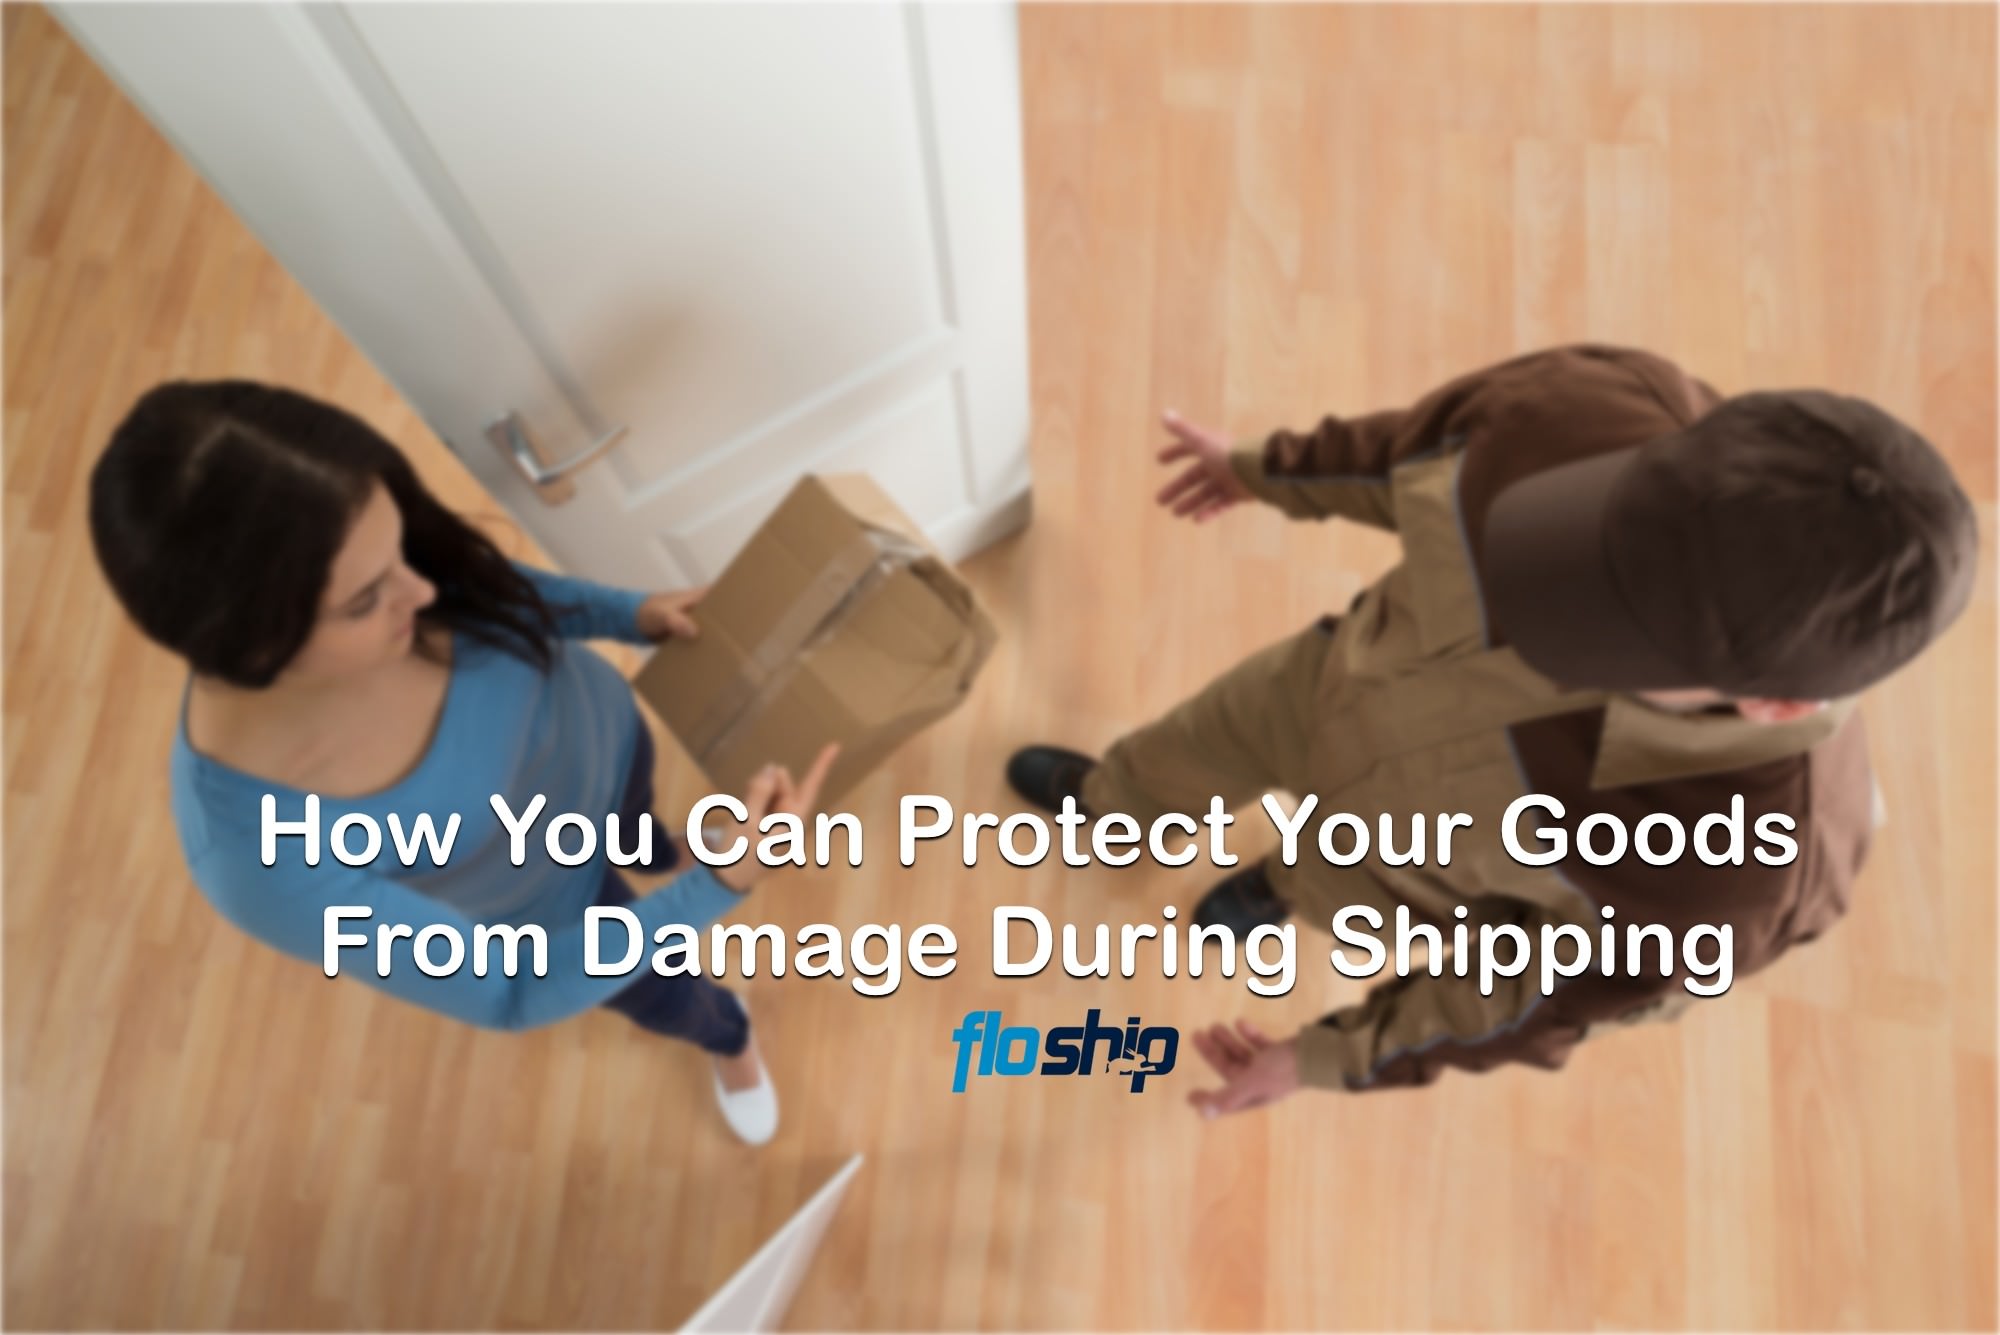 Packing Tips to Avoid Damaged Goods and Customer Returns Floship